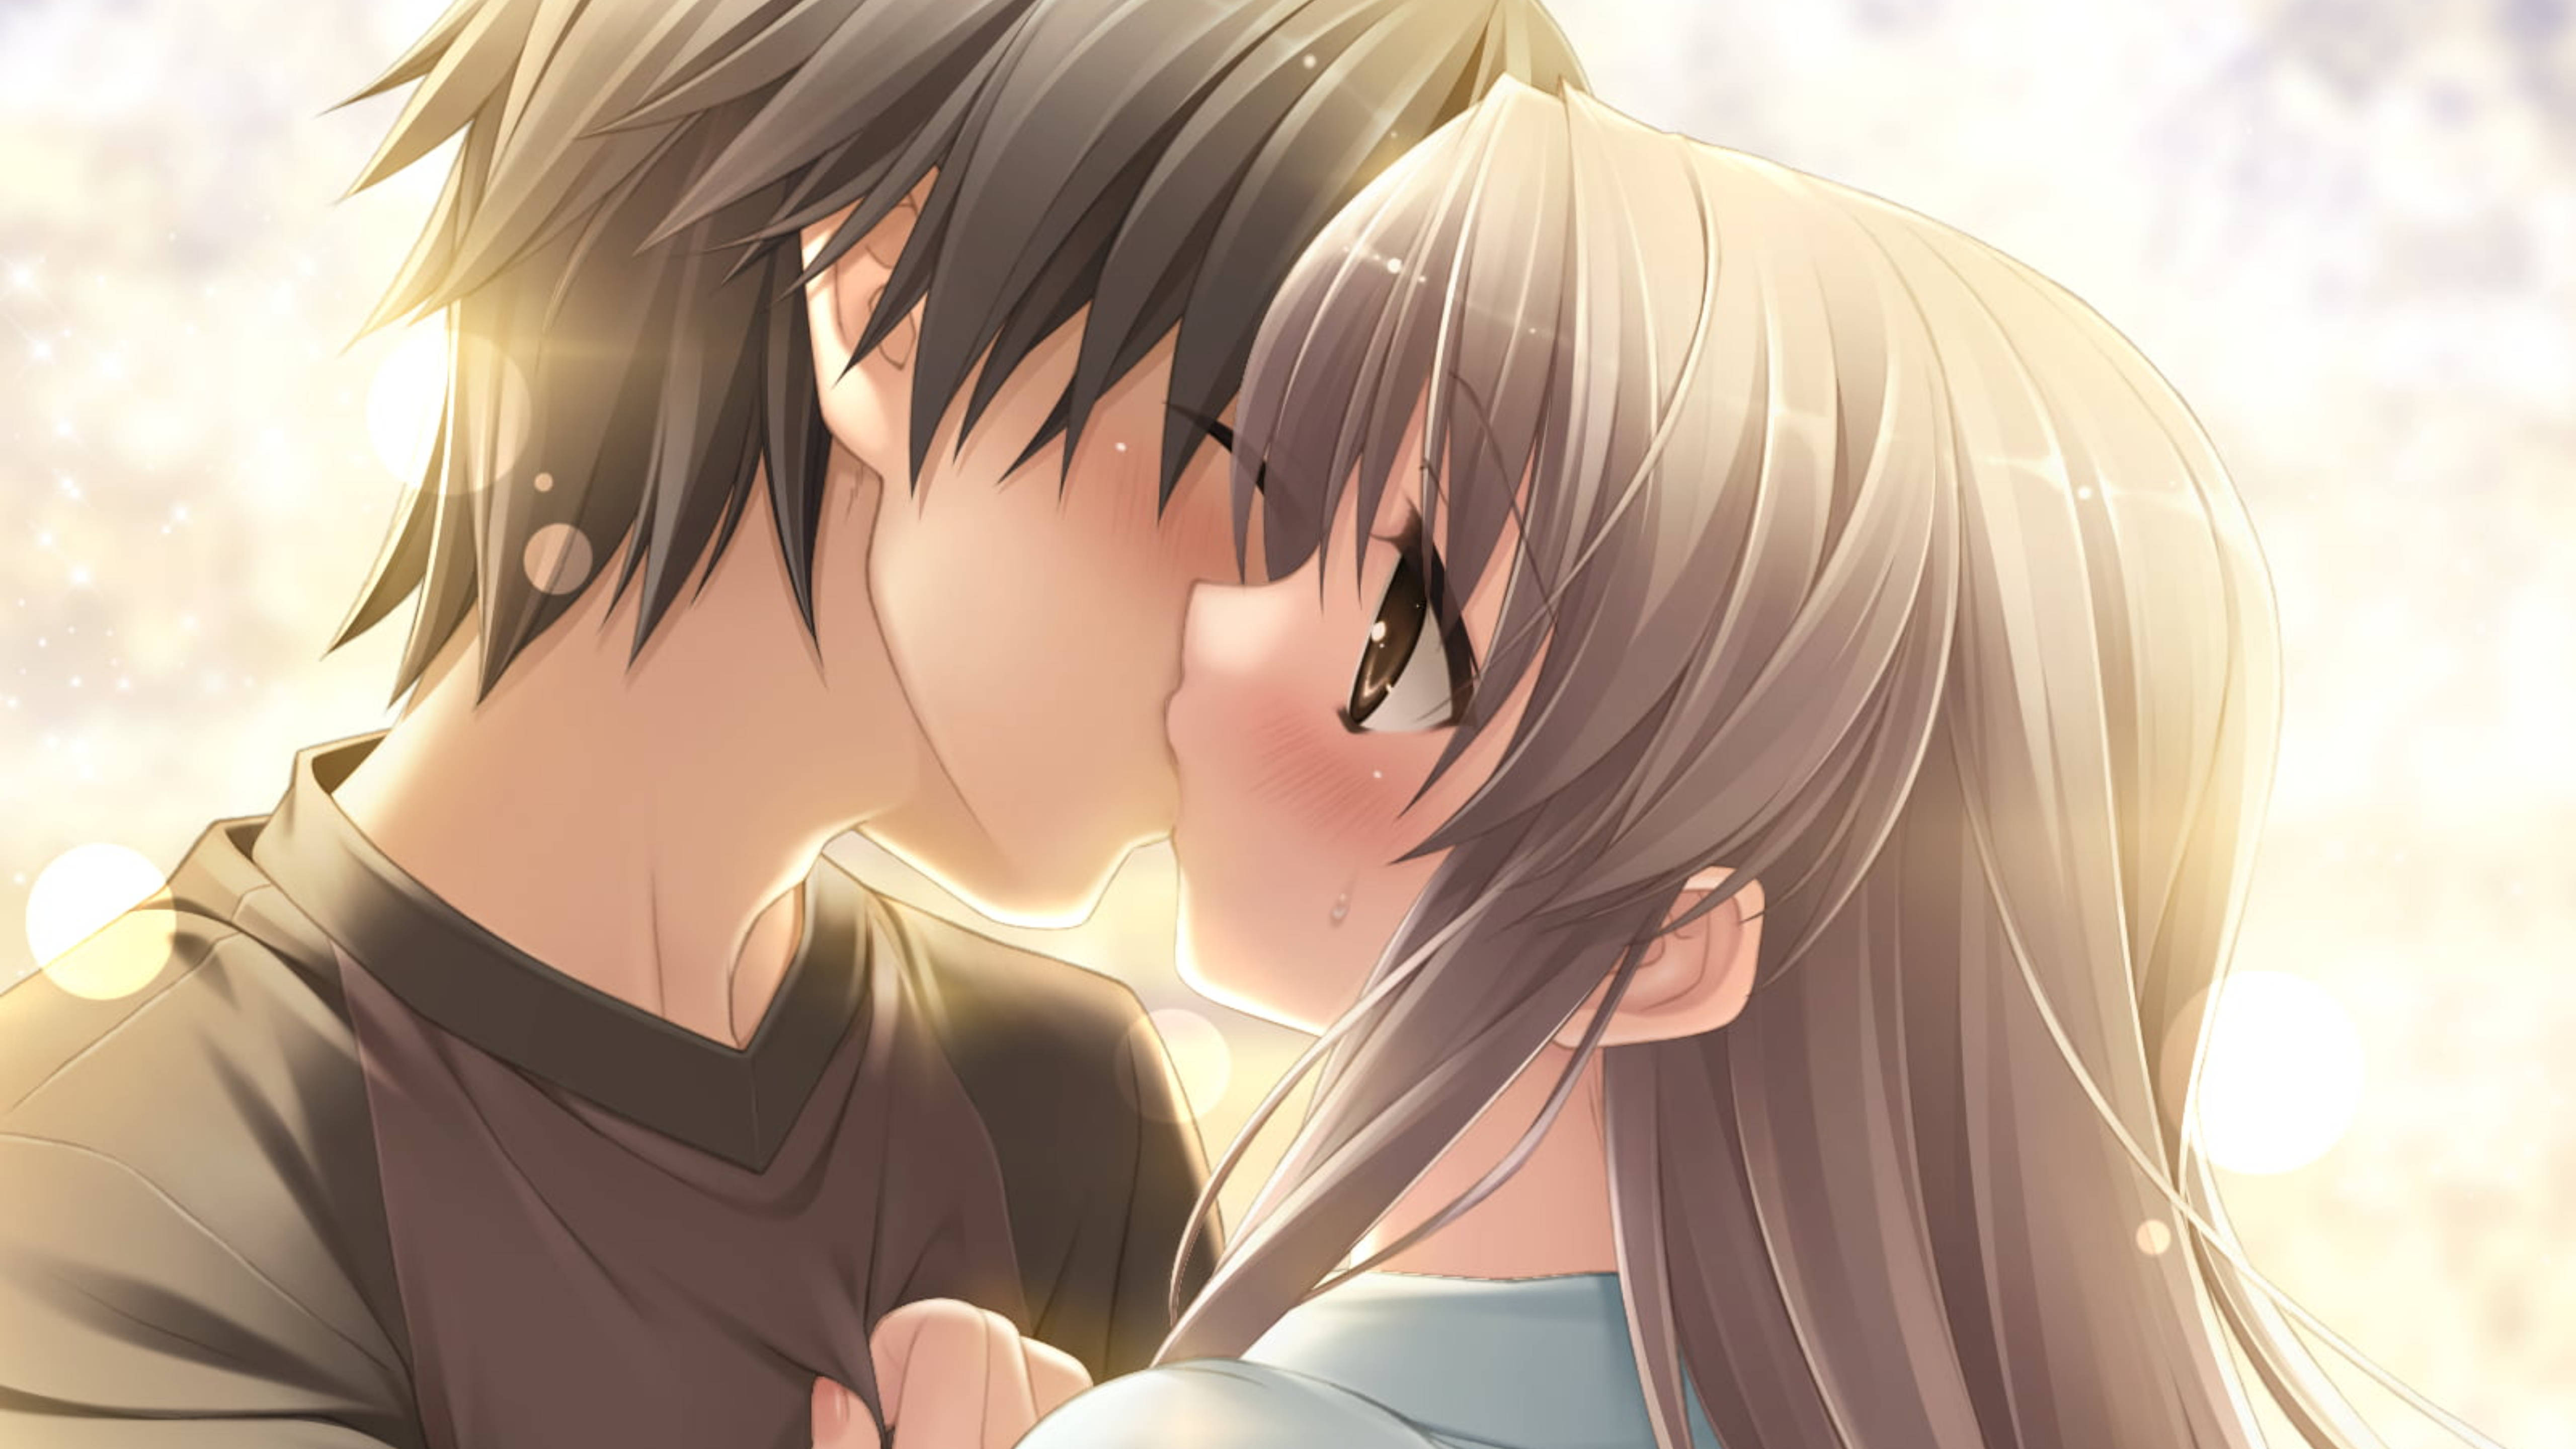 Download Cute Anime Couple Kiss In Soft Lighting Wallpaper 